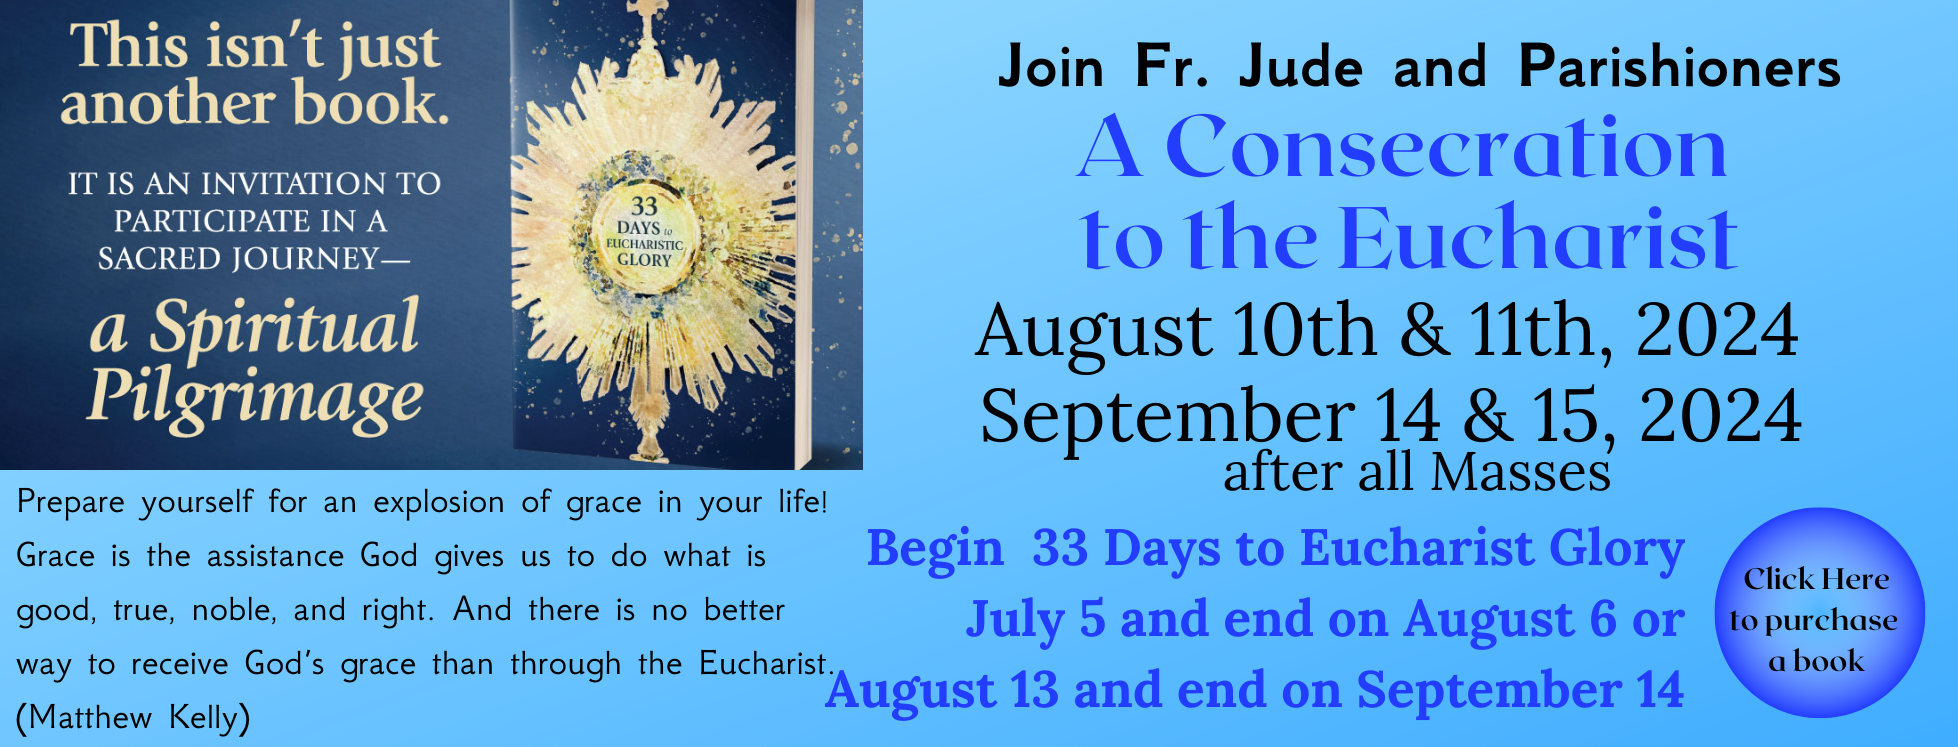 BAN Consecration to the Eucharist August 10th and 11th after all Masses (1958 x 747 px) (1)